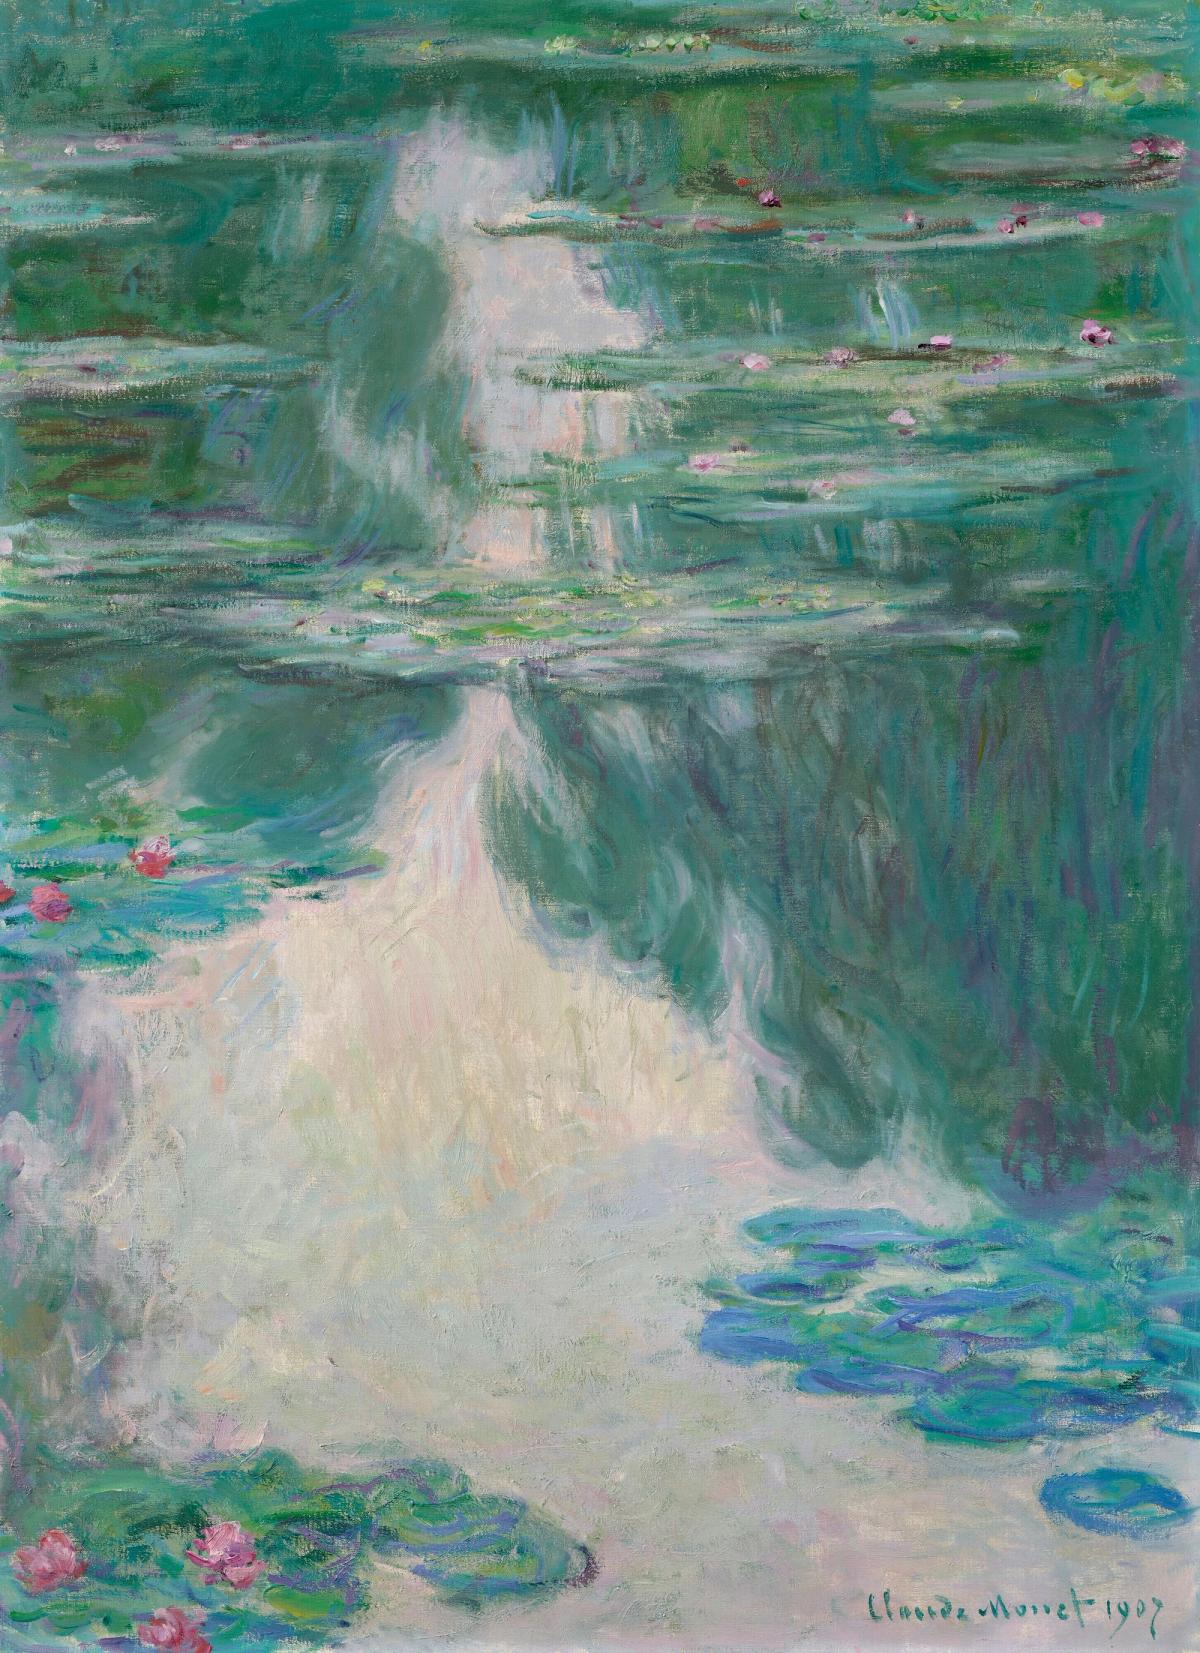 The same buyer bought both Monets for £26m each at Christie's yesterday